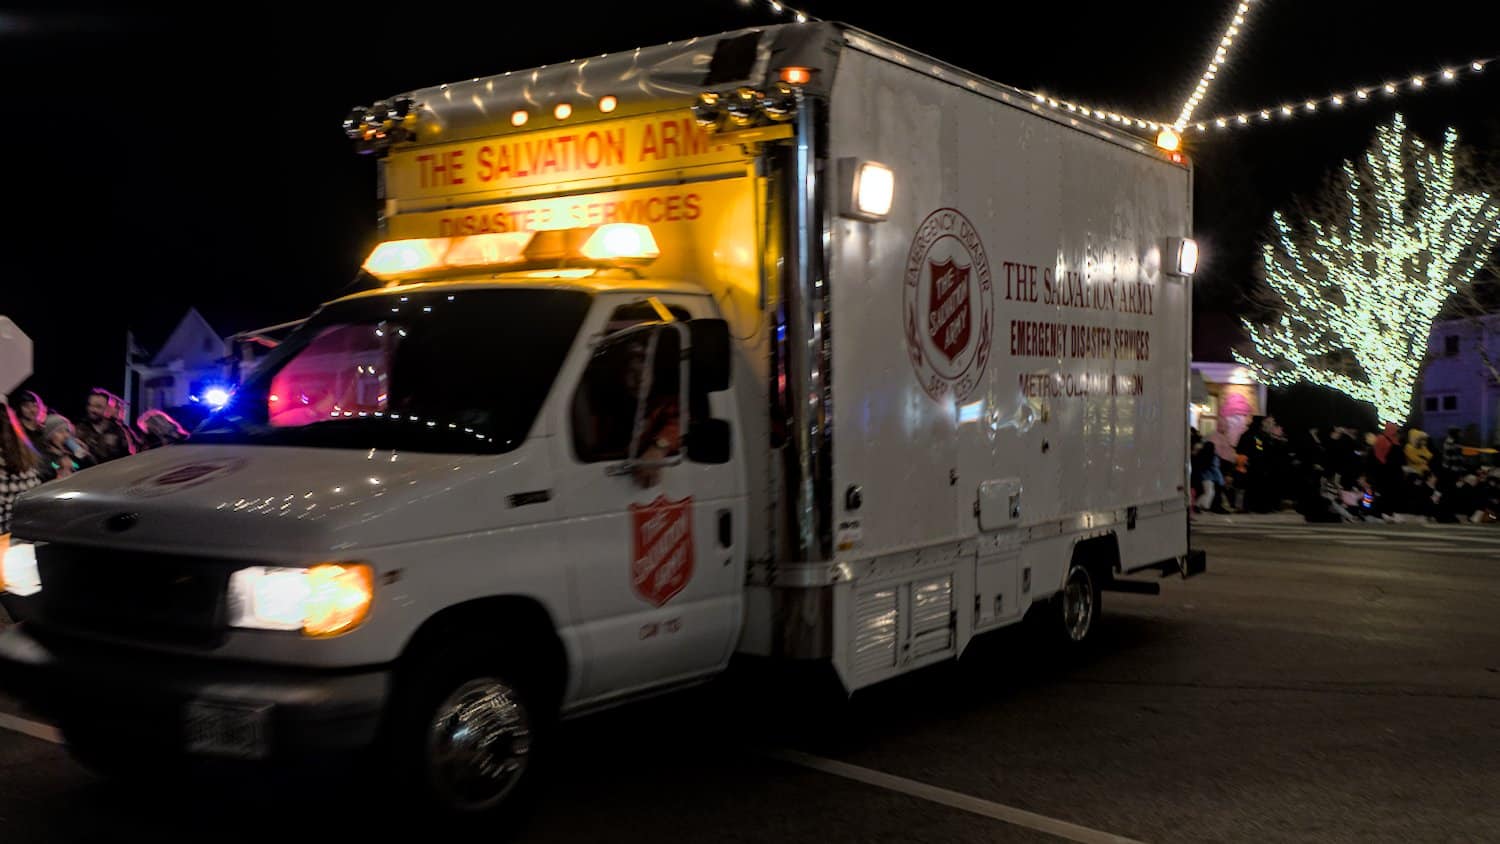 The Salvation Army Disaster Services truck.